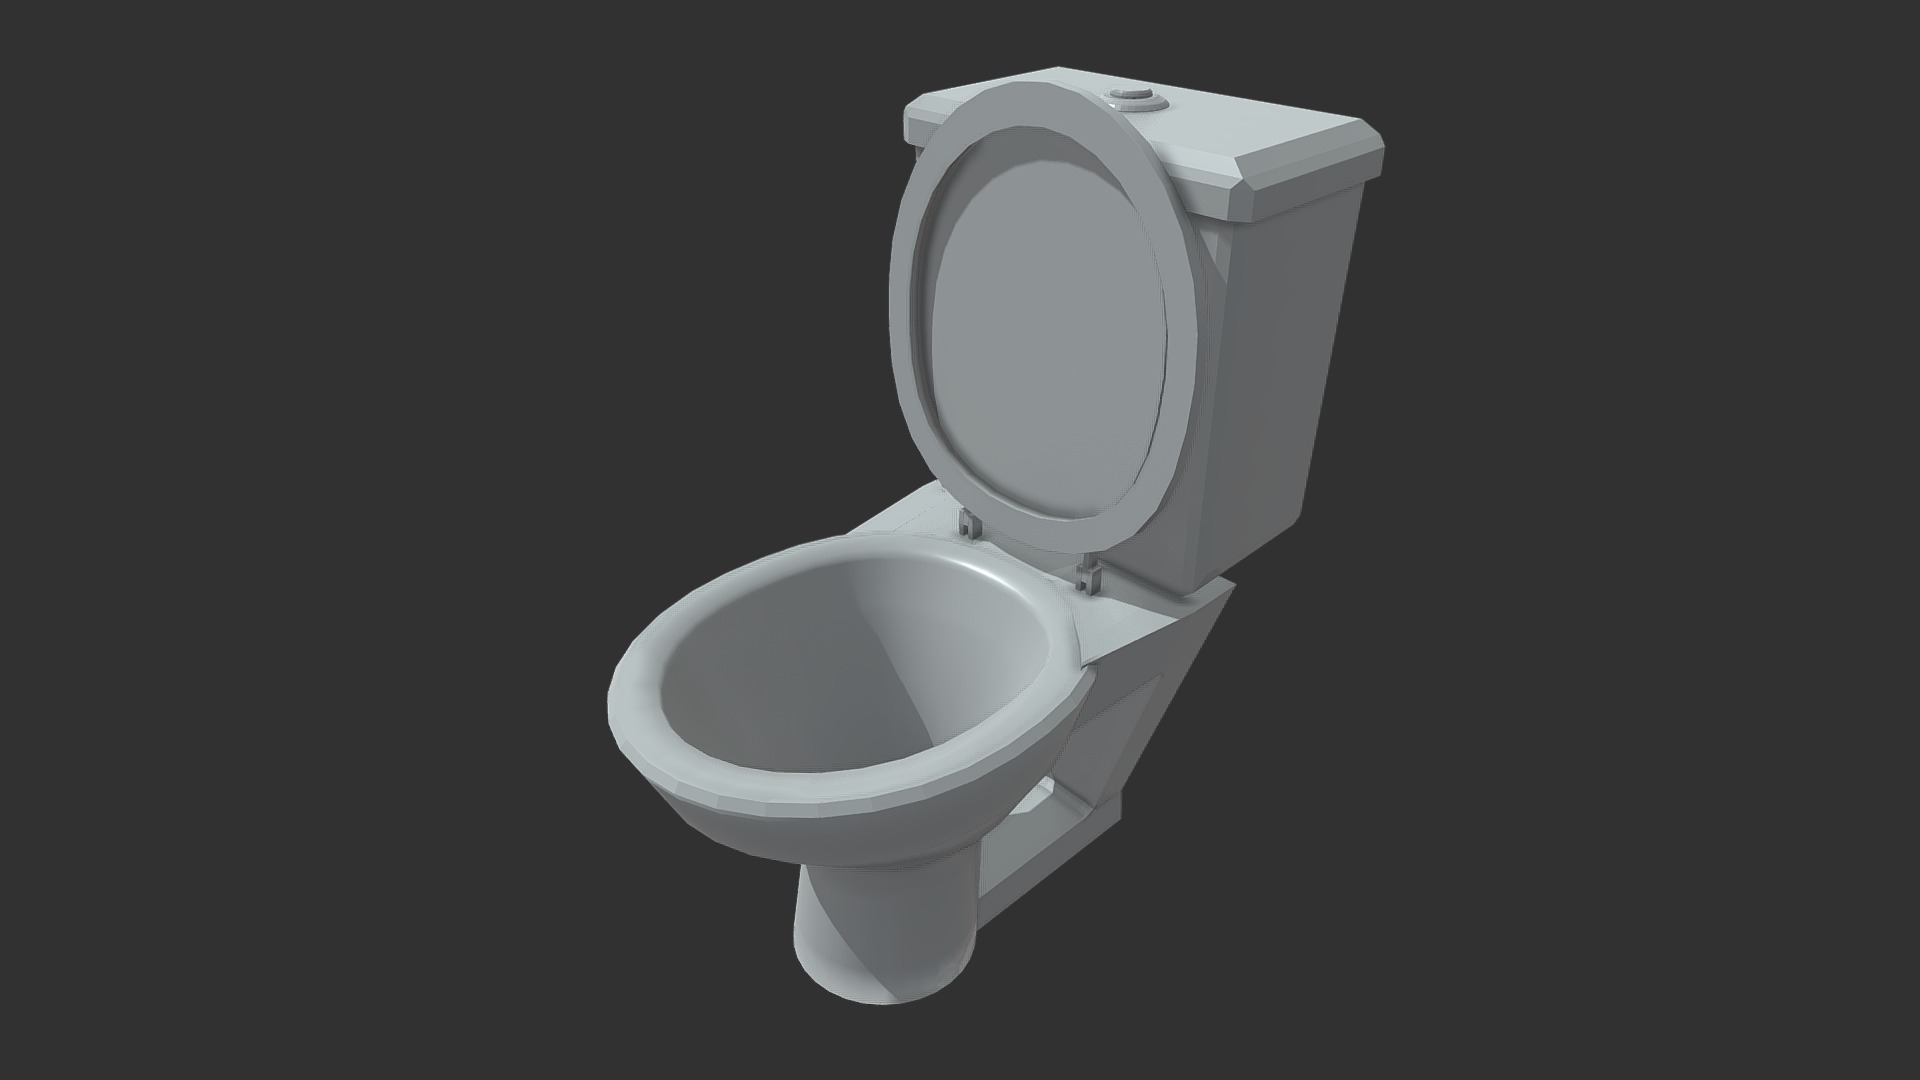 3D model toilet - This is a 3D model of the toilet. The 3D model is about a toilet with a seat cover.